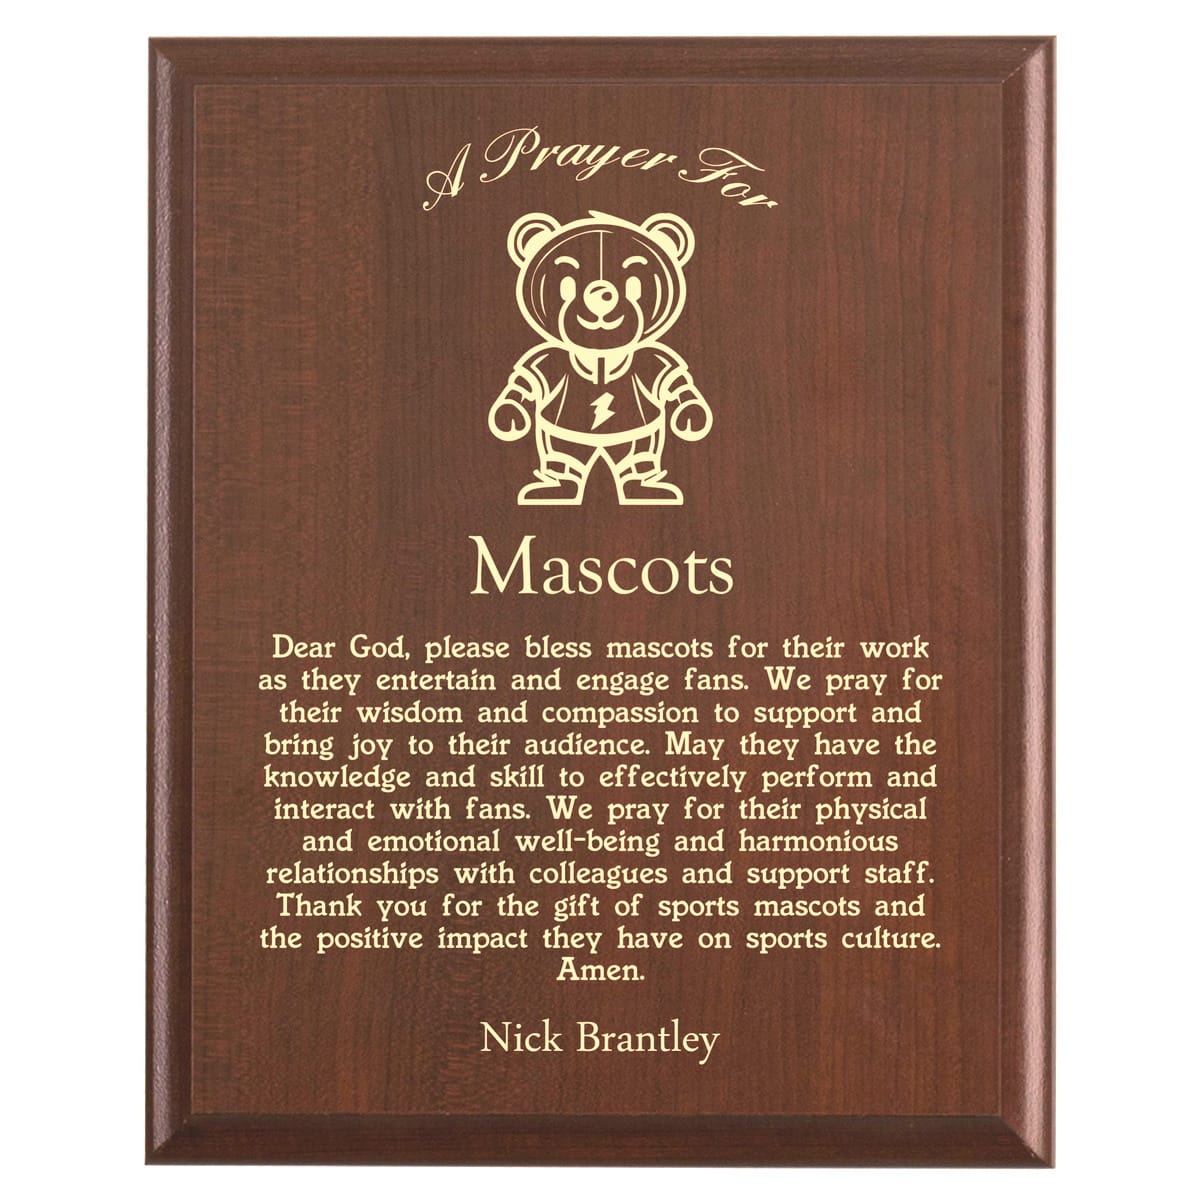 Plaque photo: Team Mascot Prayer Plaque design with free personalization. Wood style finish with customized text.